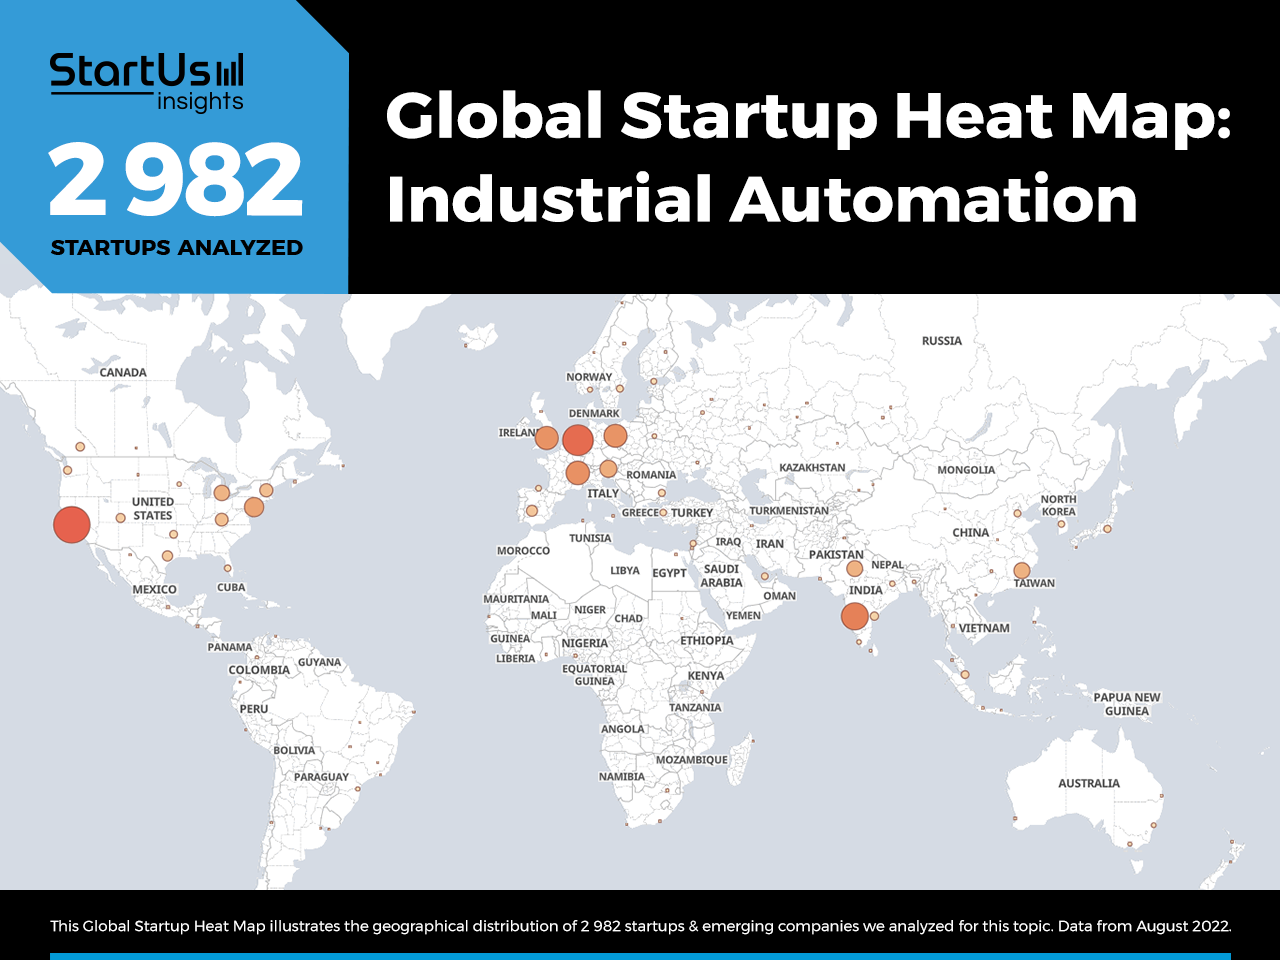 Industrial-Automation-startups-Heat-Map-StartUs-Insights-noresize